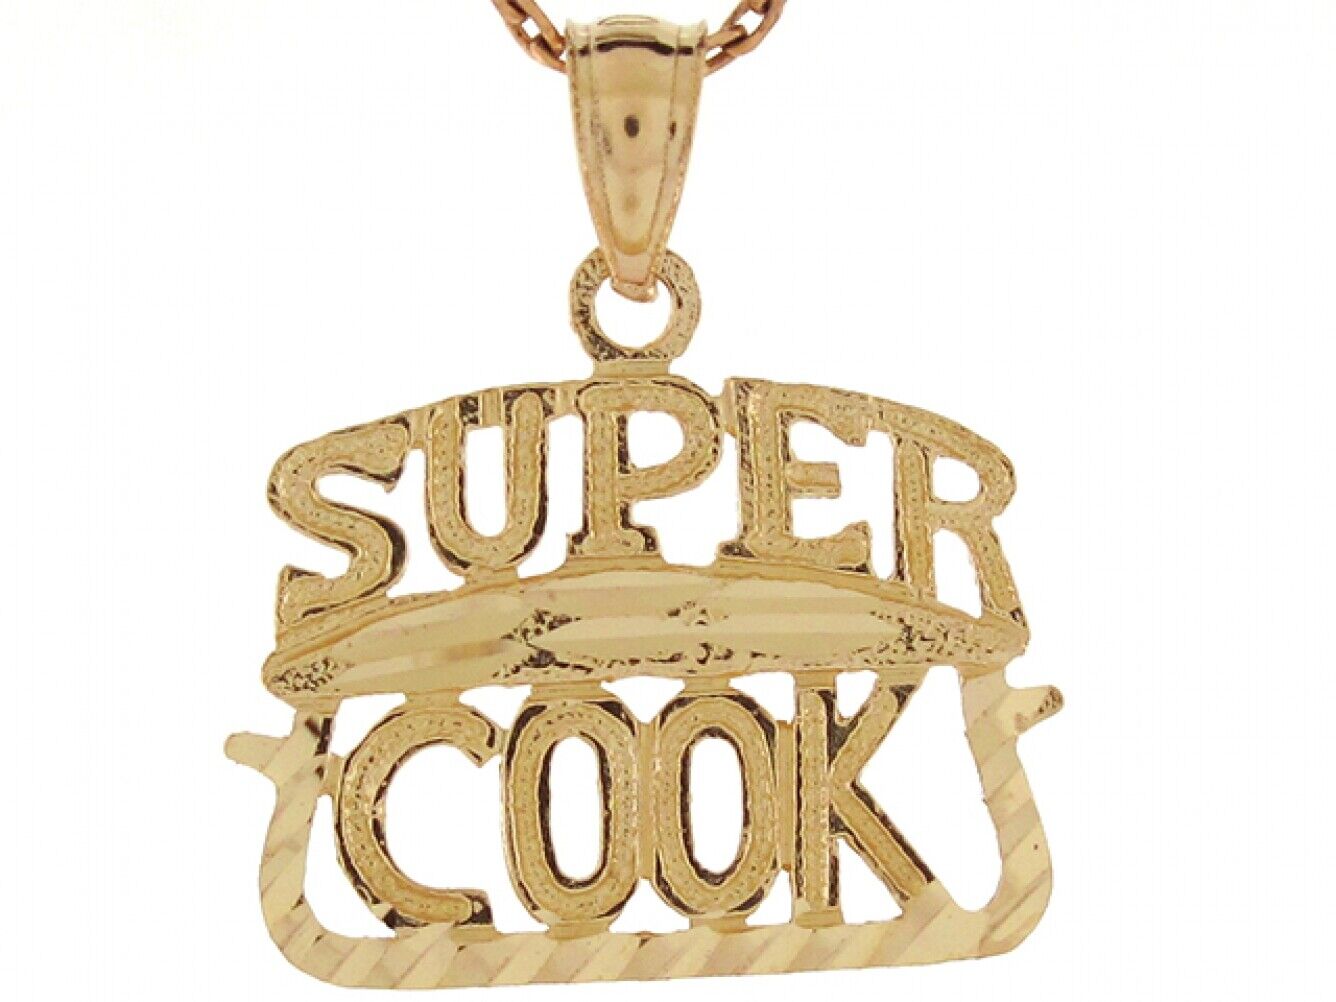 10k or 14k Real Yellow Gold 1.9cm x 1.7cm Super Cook Hip Cool Charm Pendant